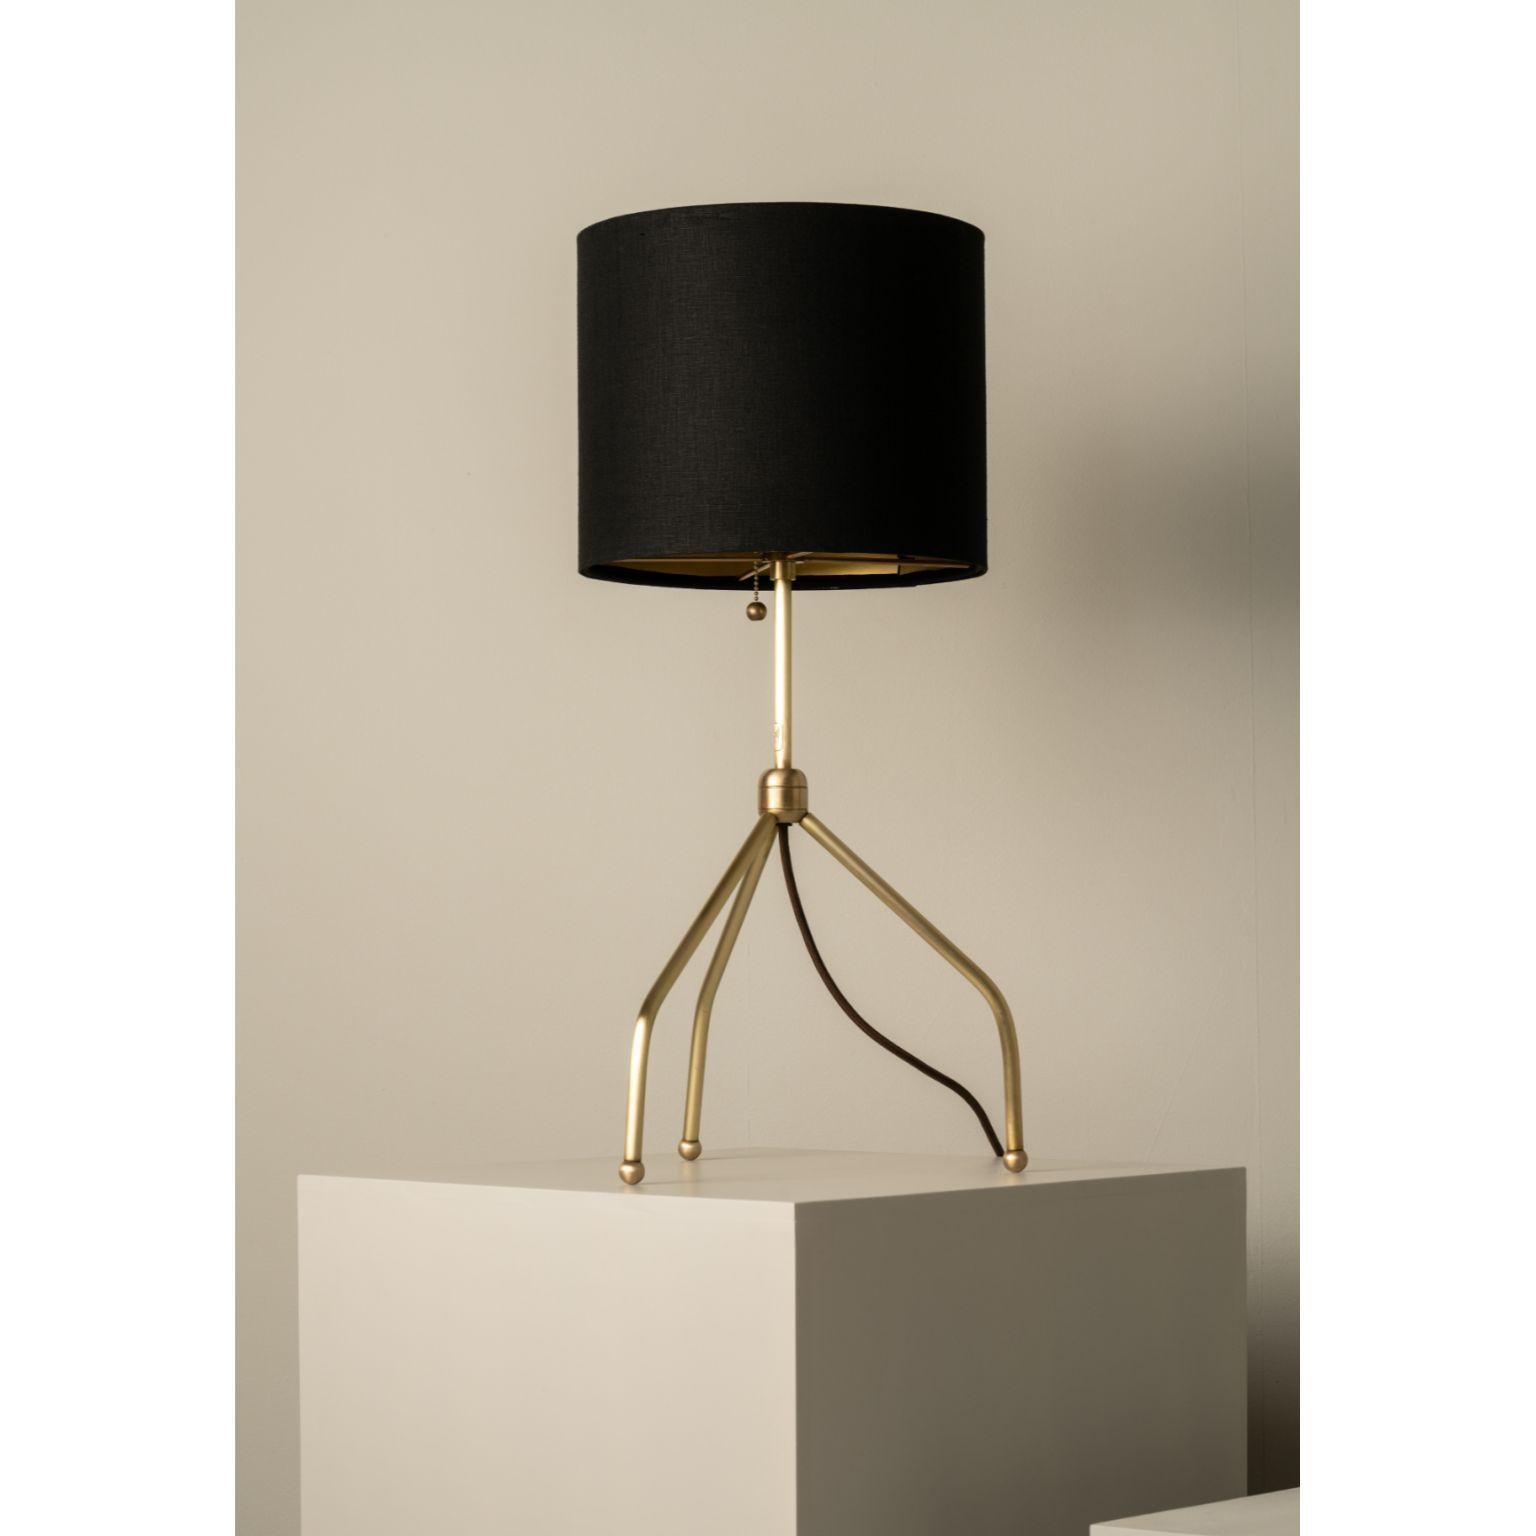 Spider Long Legs Table Lamp by Isabel Moncada
Dimensions: Ø 35.5 x H 66 cm.
Materials: Forged and brushed brass and linen-lined fiberglass lampshade.

An elegant lamp that gently blends with its surroundings and brings a touch of brightness with its